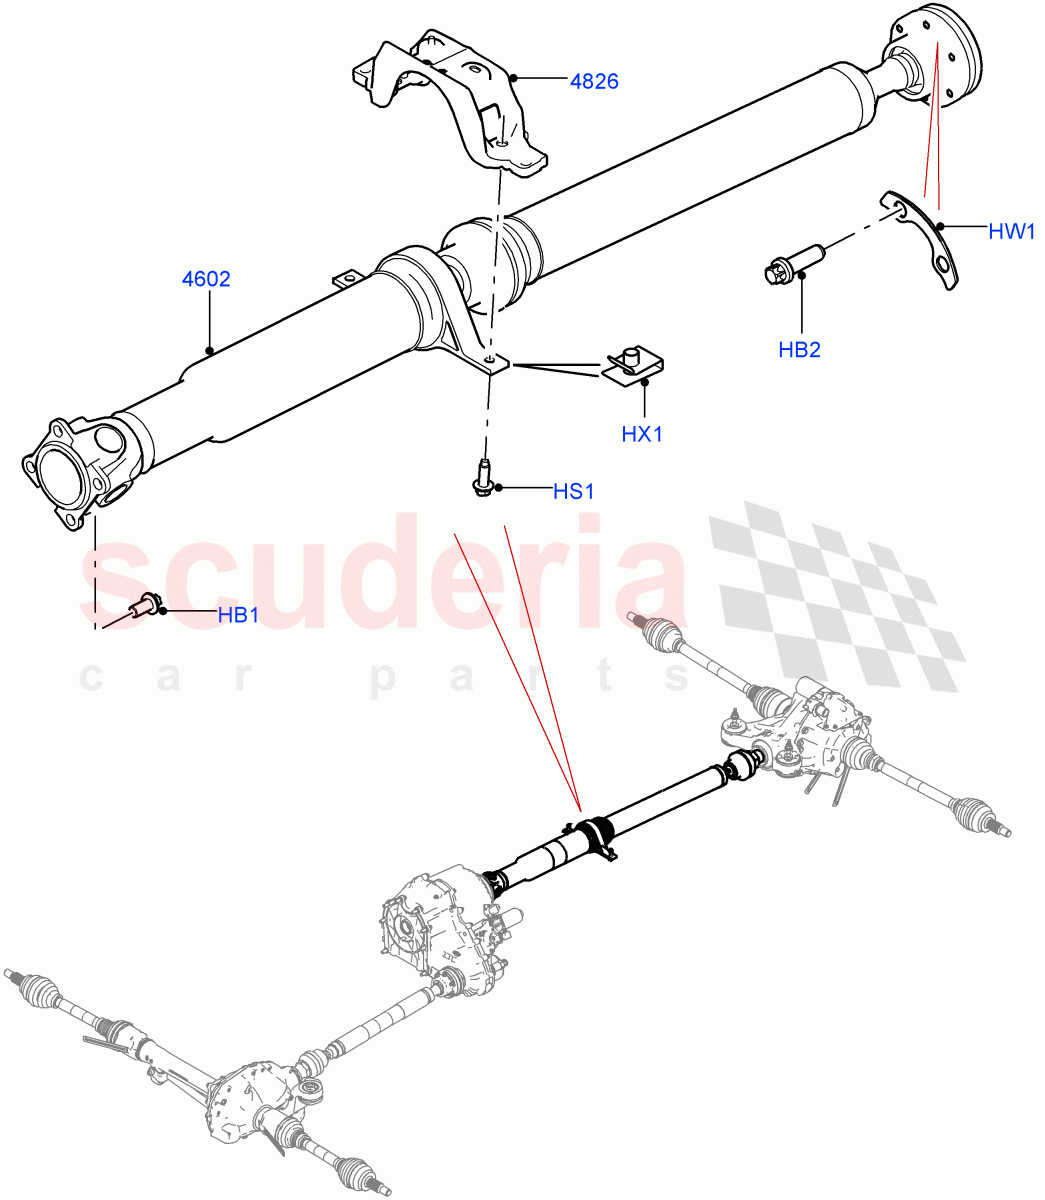 Drive Shaft - Rear Axle Drive(Solihull Plant Build, Propshaft)((V)FROMHA000001) of Land Rover Land Rover Discovery 5 (2017+) [3.0 I6 Turbo Diesel AJ20D6]